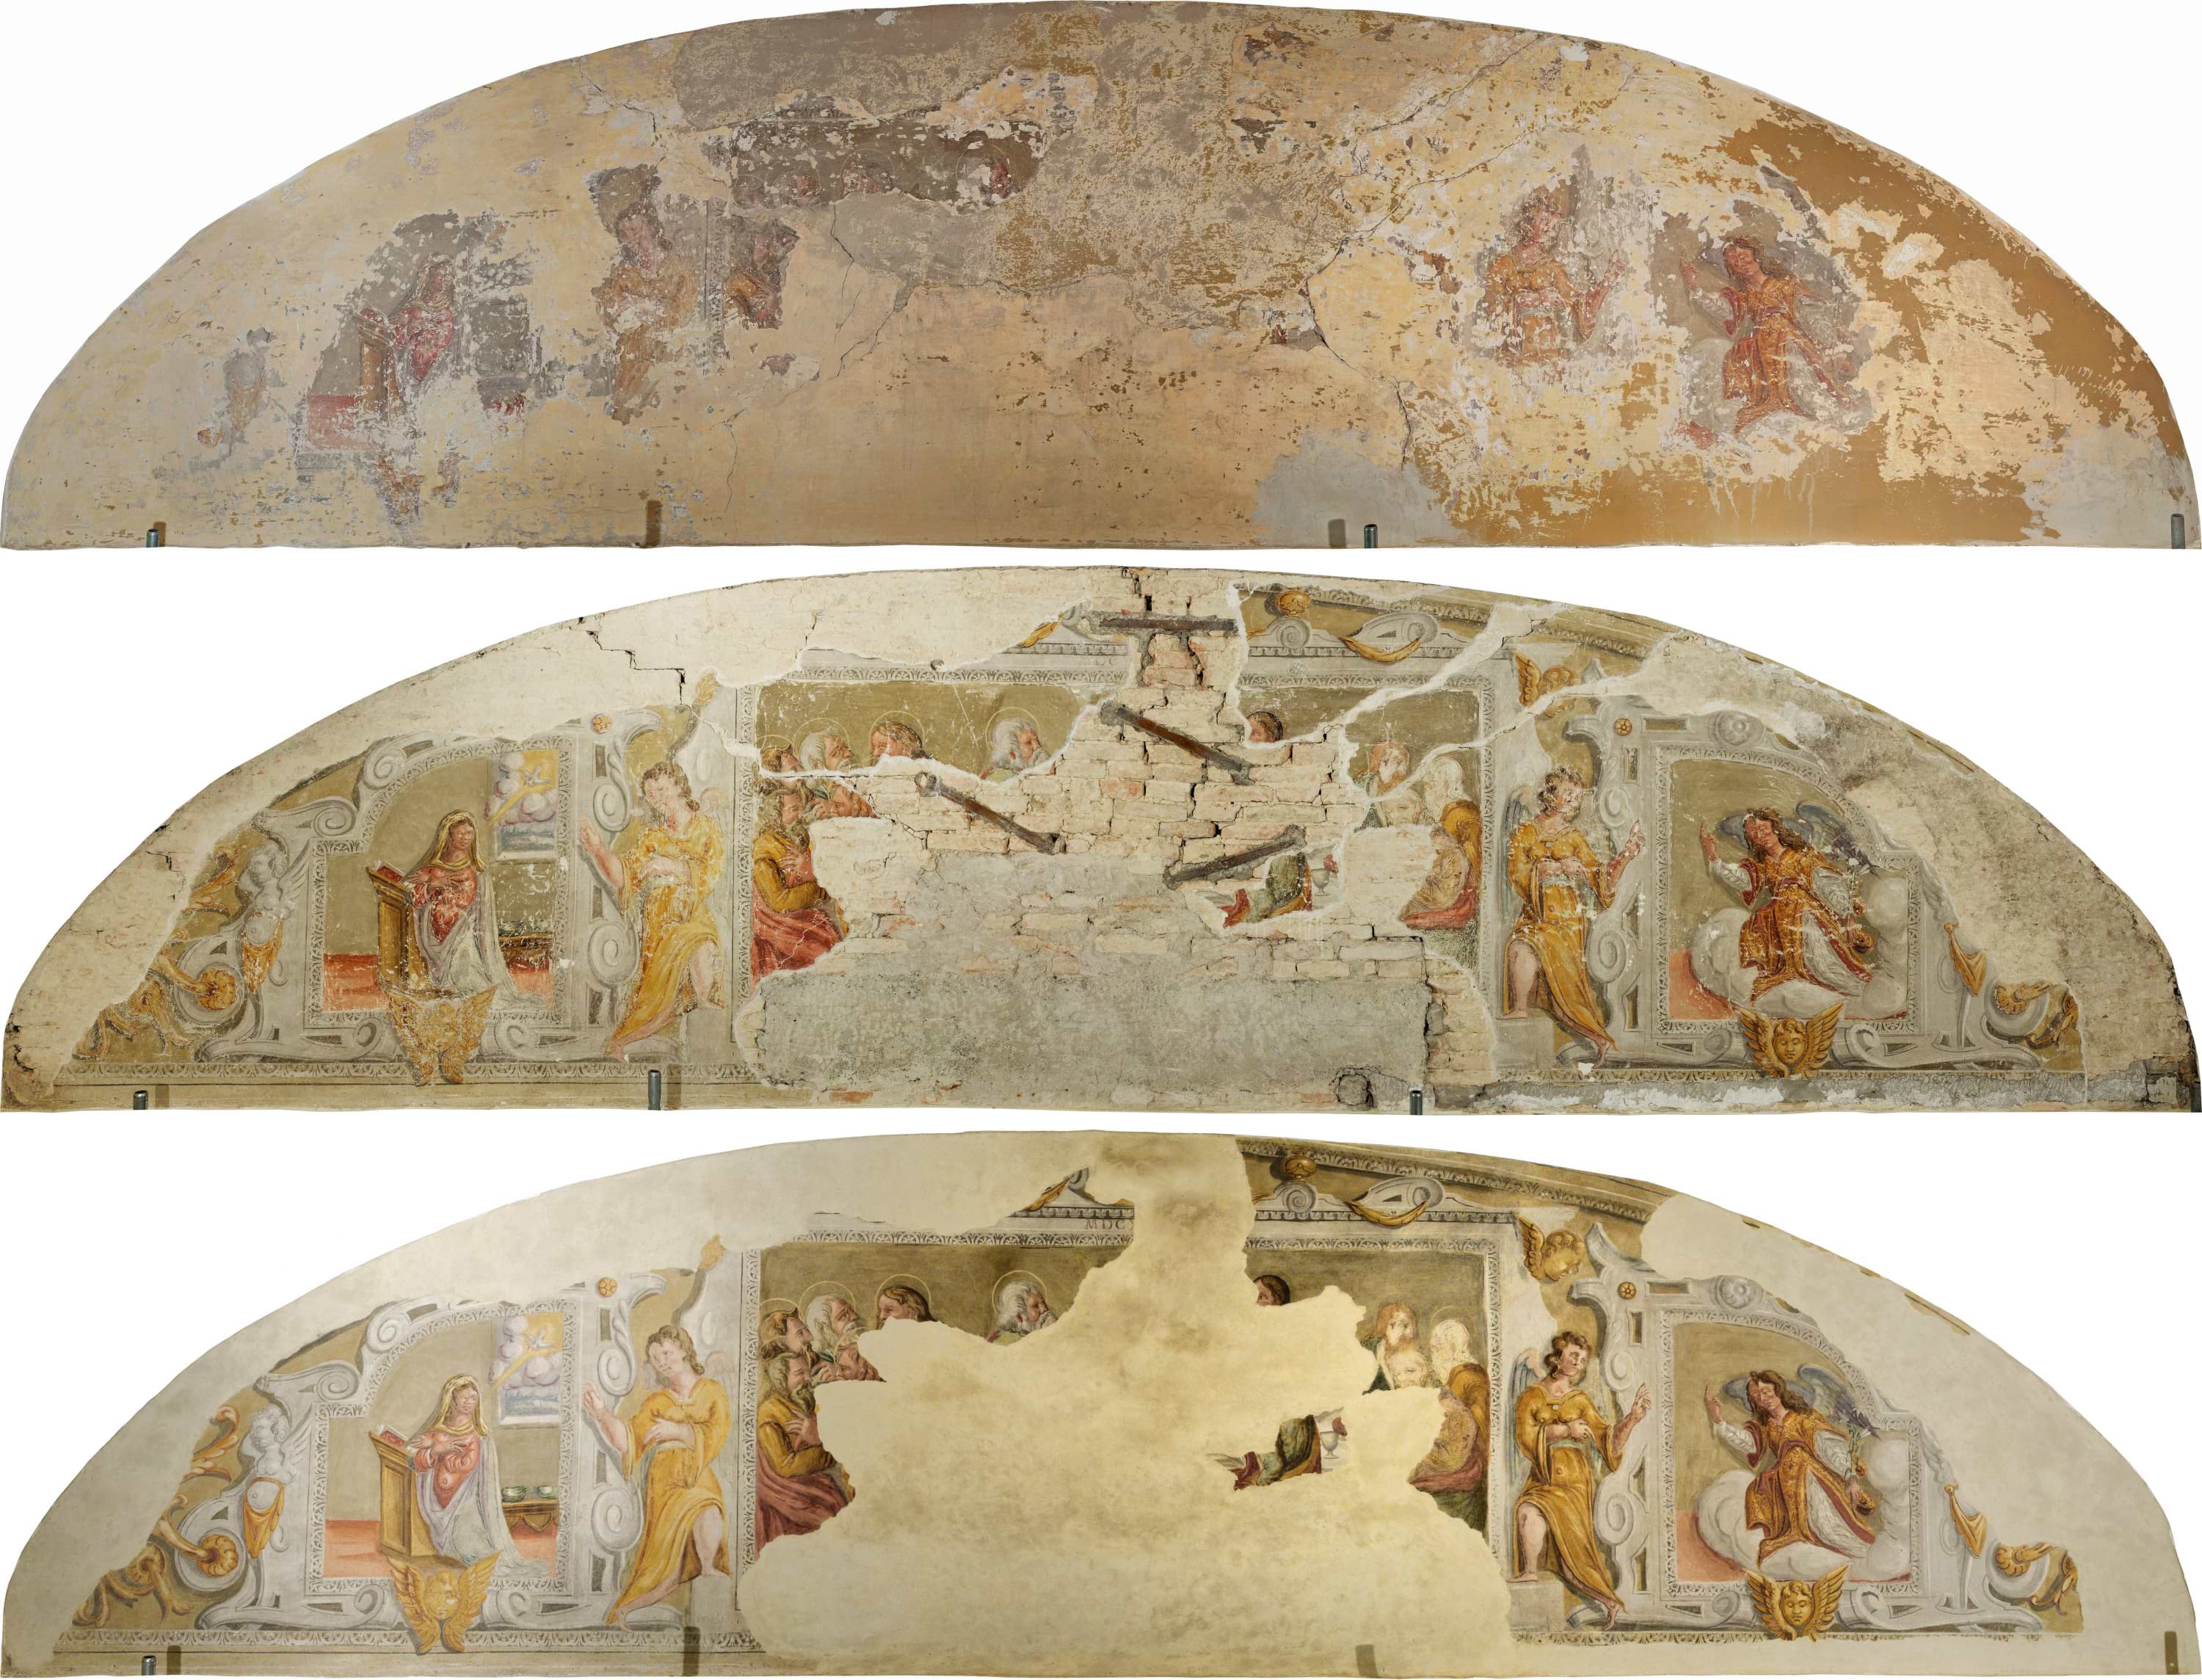 The phases of fresco recovery